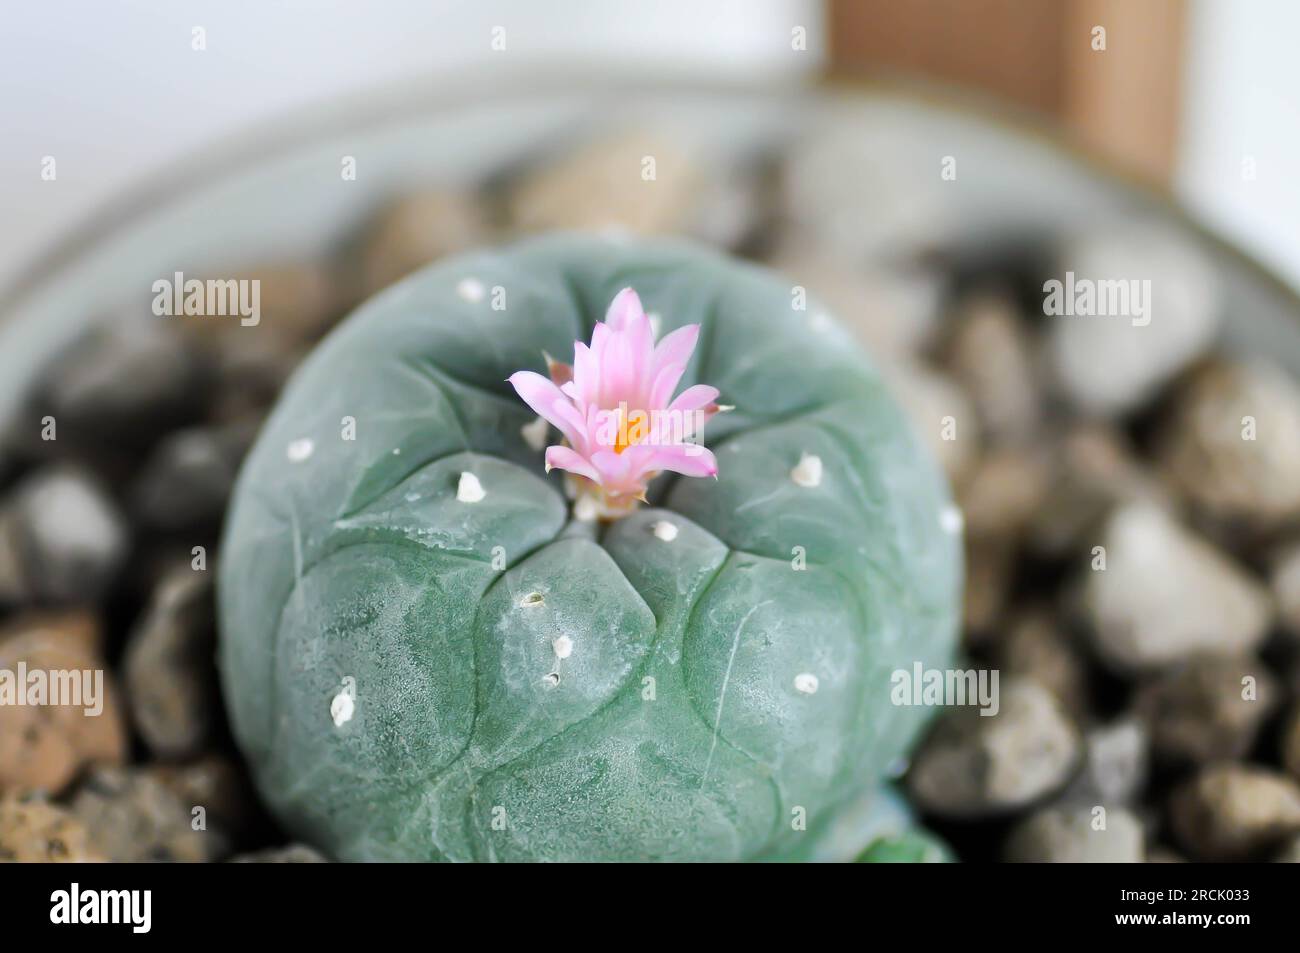 Lophophora fricii or Peyote cactus or Lophophora williamsii , Peyote Lophophora williamsii or cactus with flower or cactus flower Stock Photo